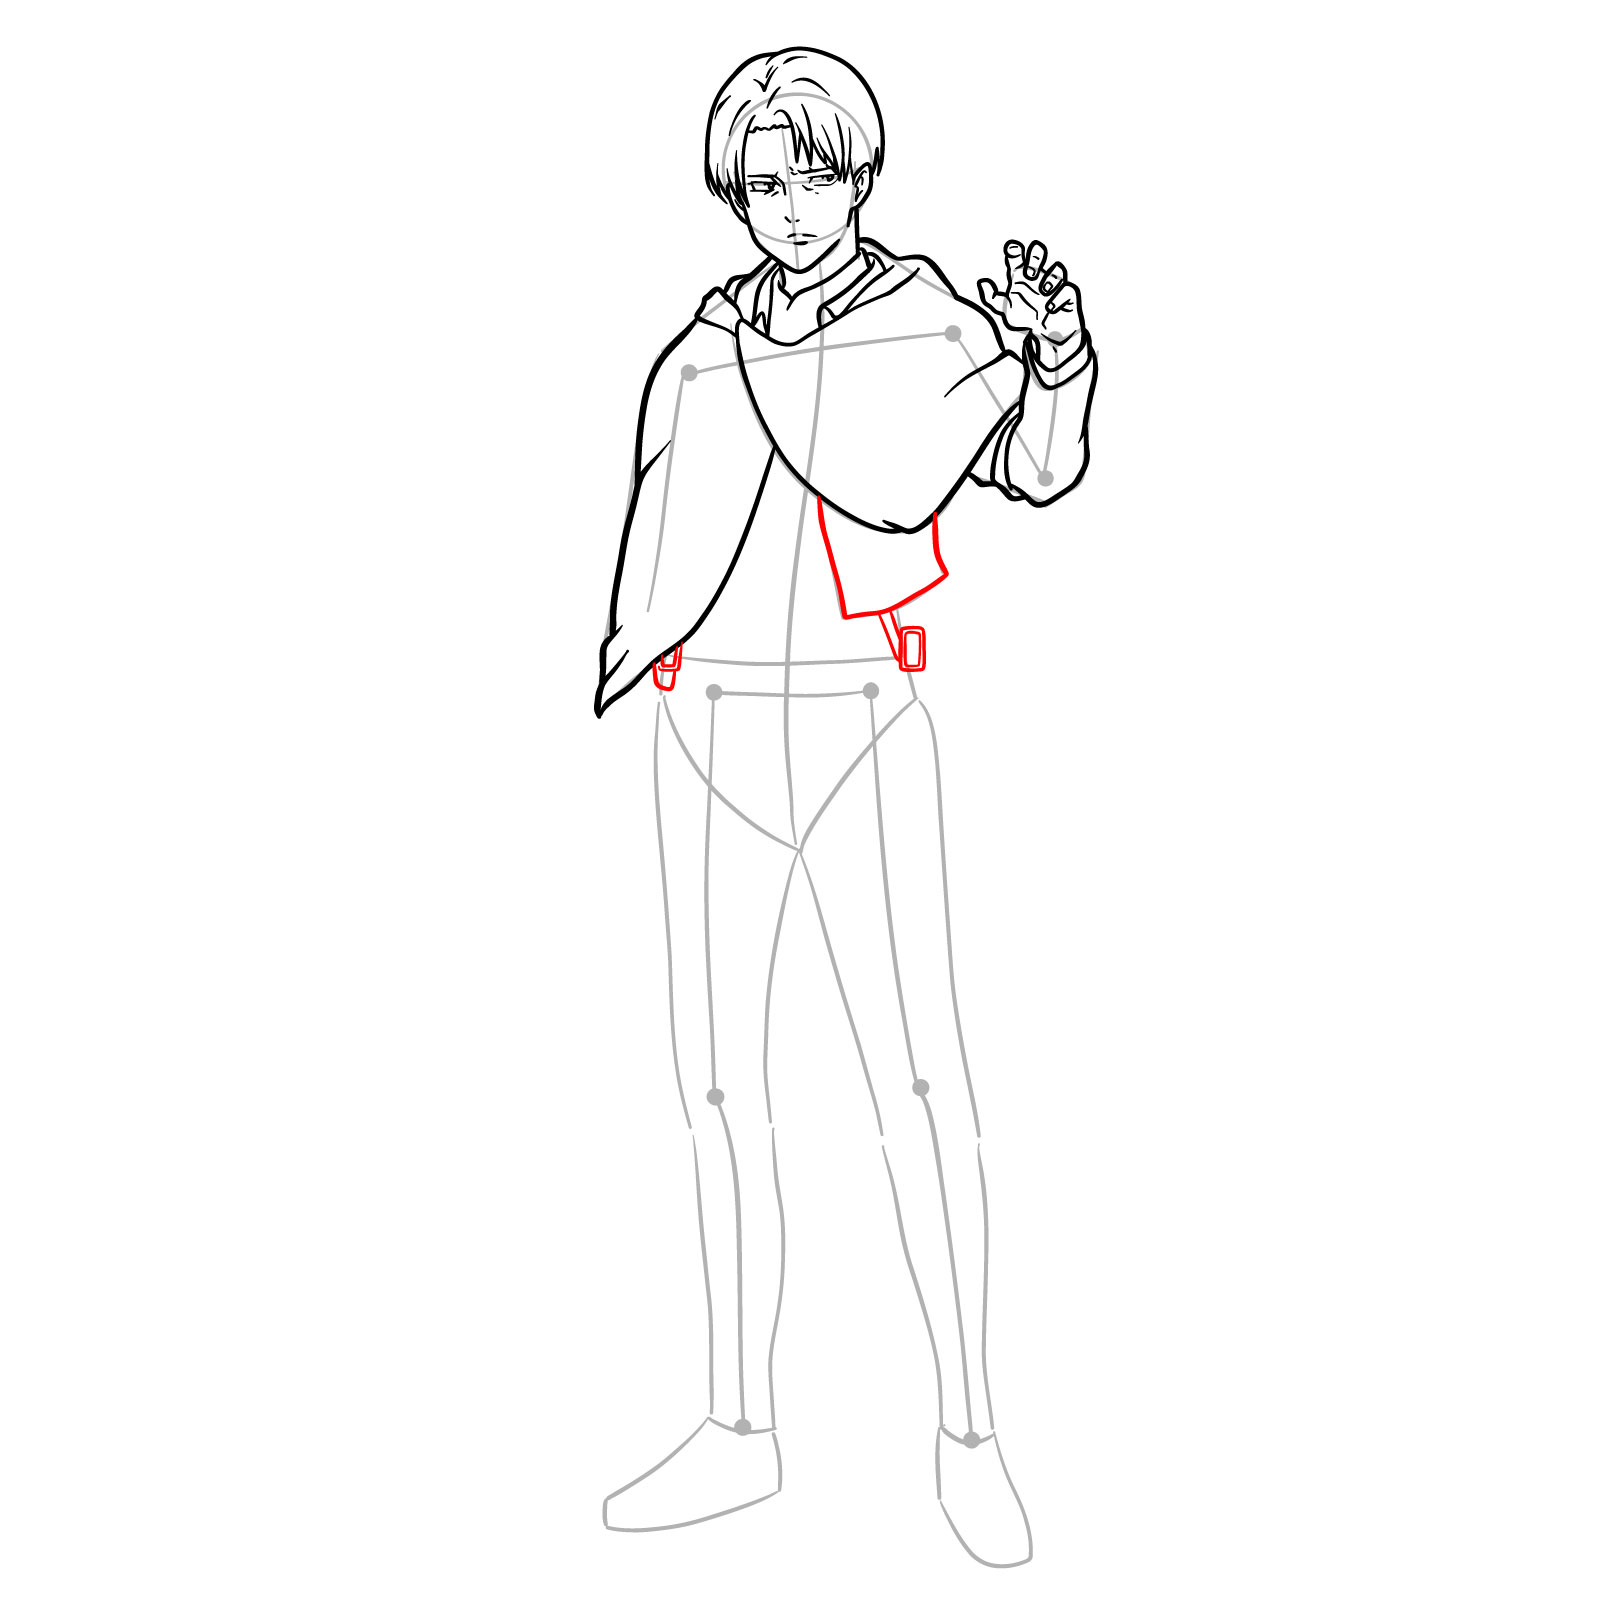 How to draw Captain Levi's jacket and utility belt details in a step-by-step full body drawing guide - step 15